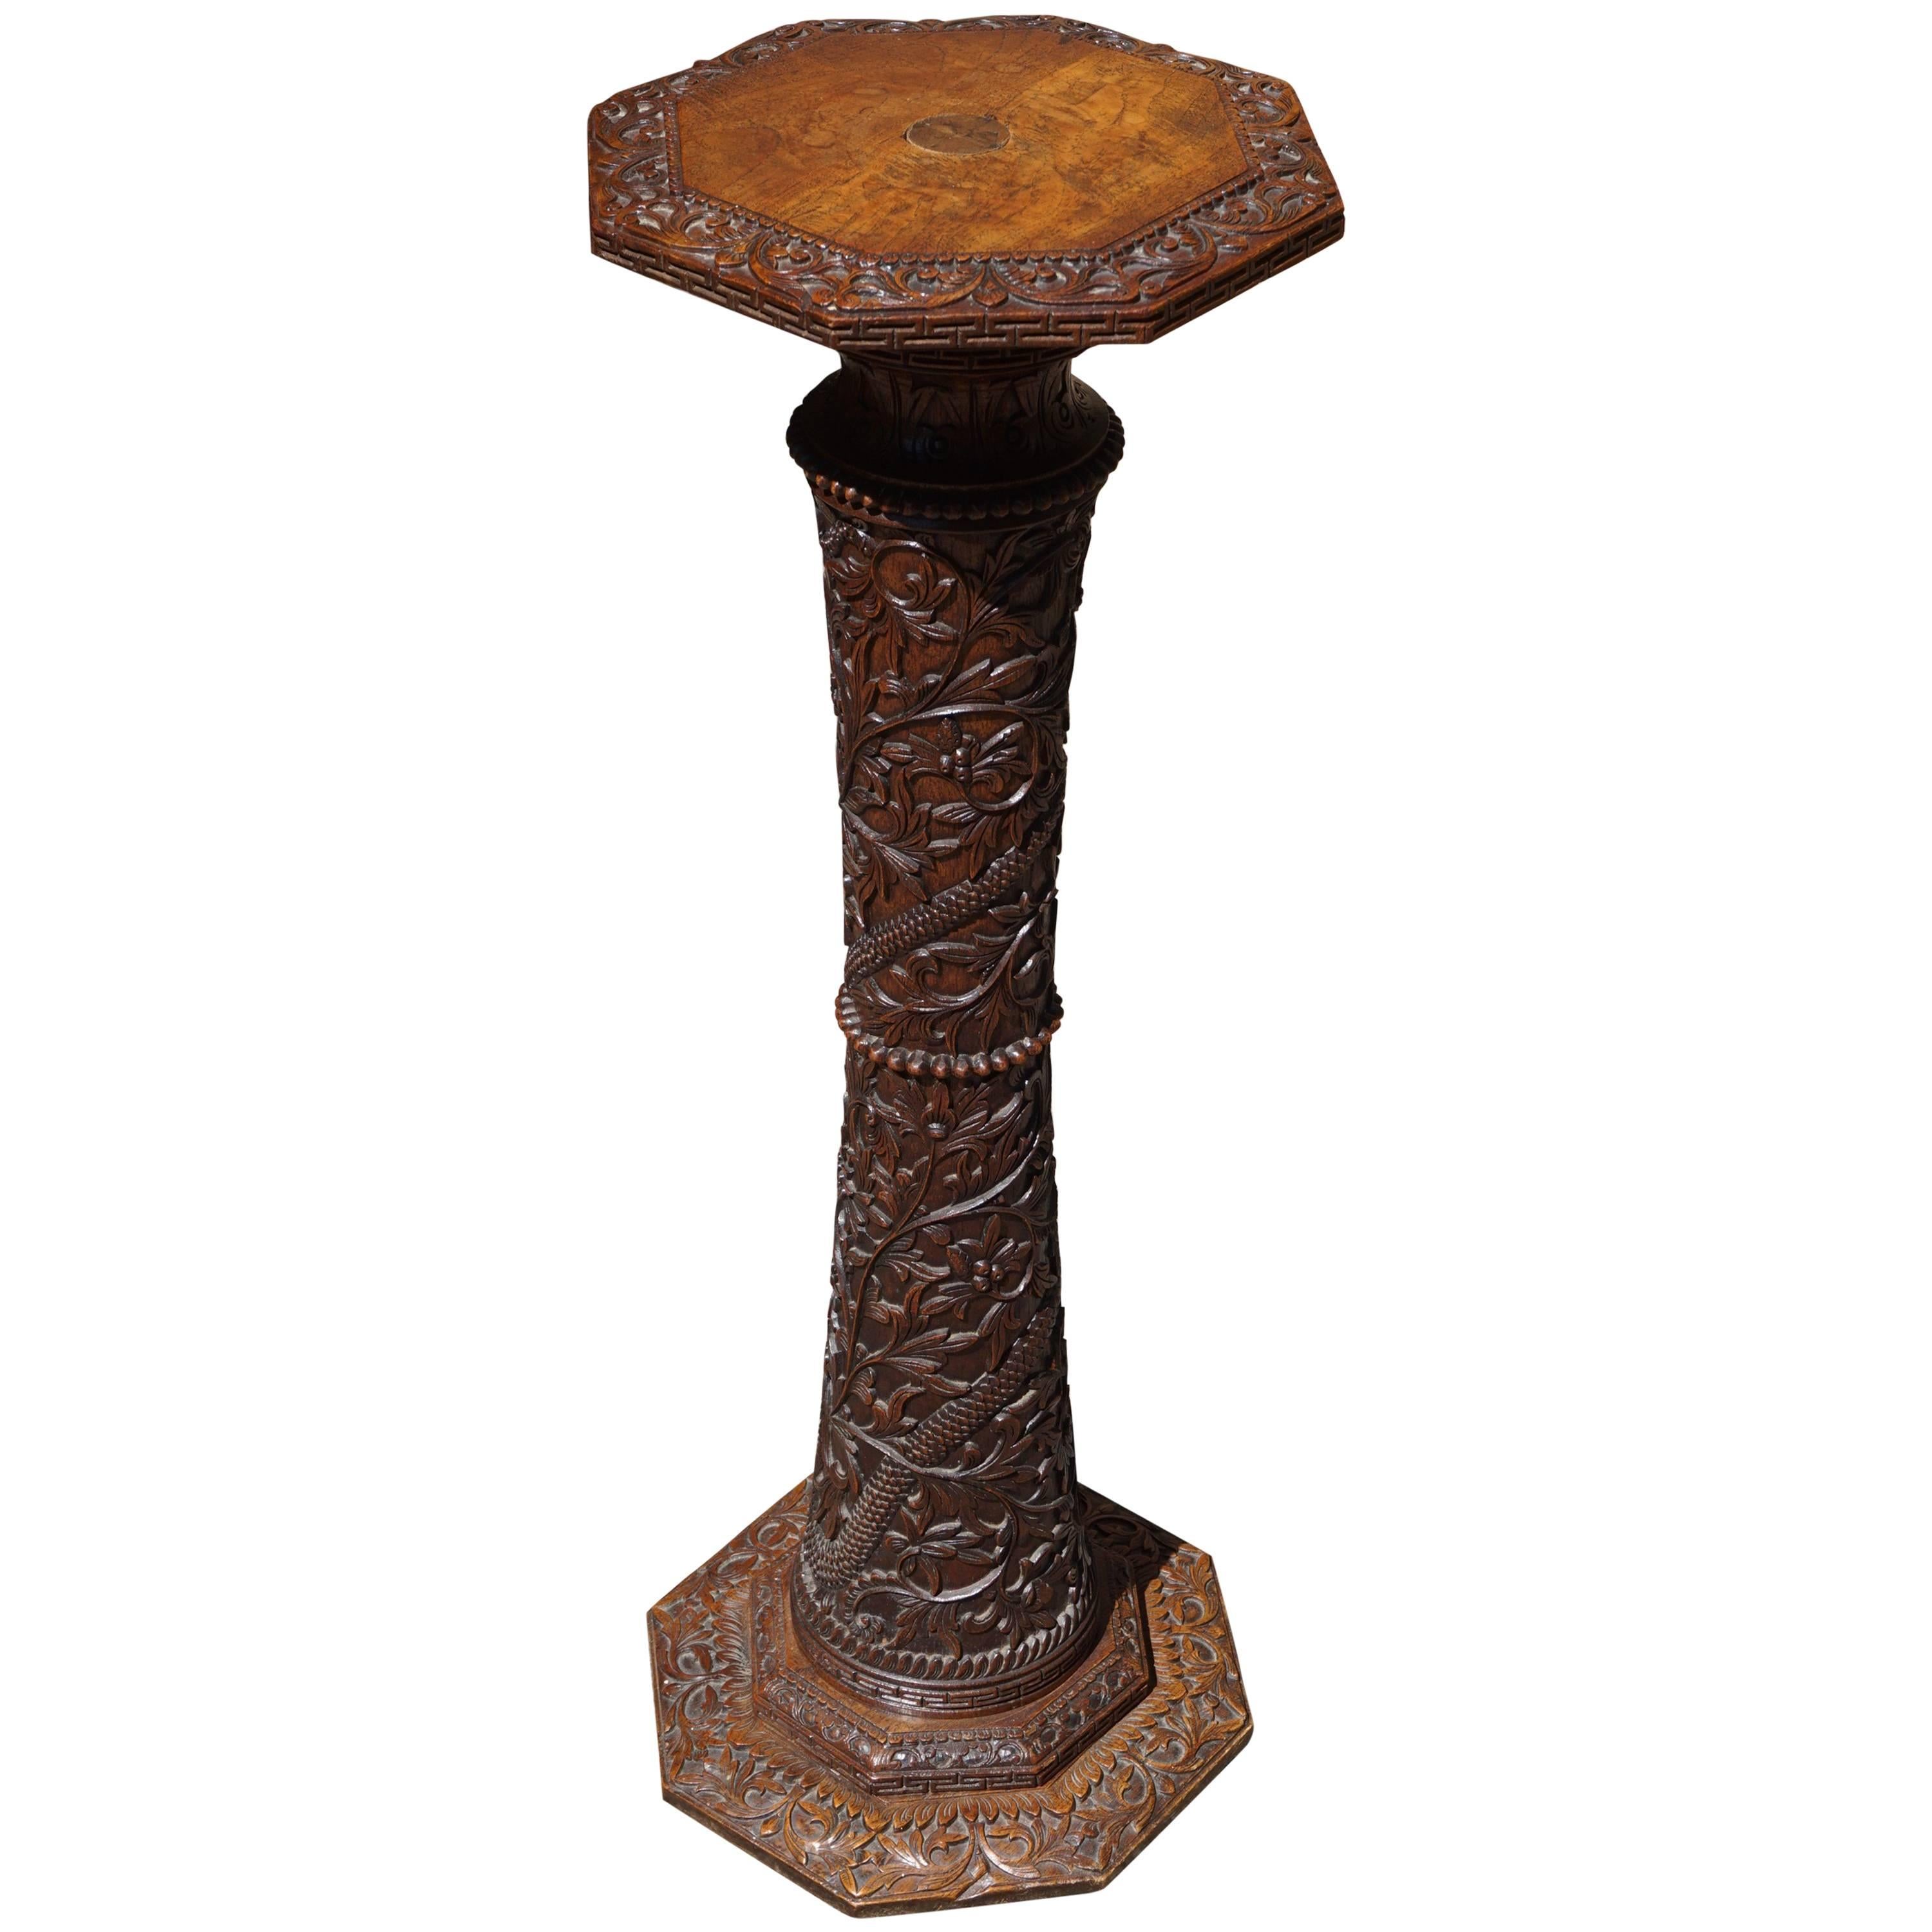 Early 20th Century Hand-Carved Stunning Hardwood Dutch Colonial Pedestal Stand